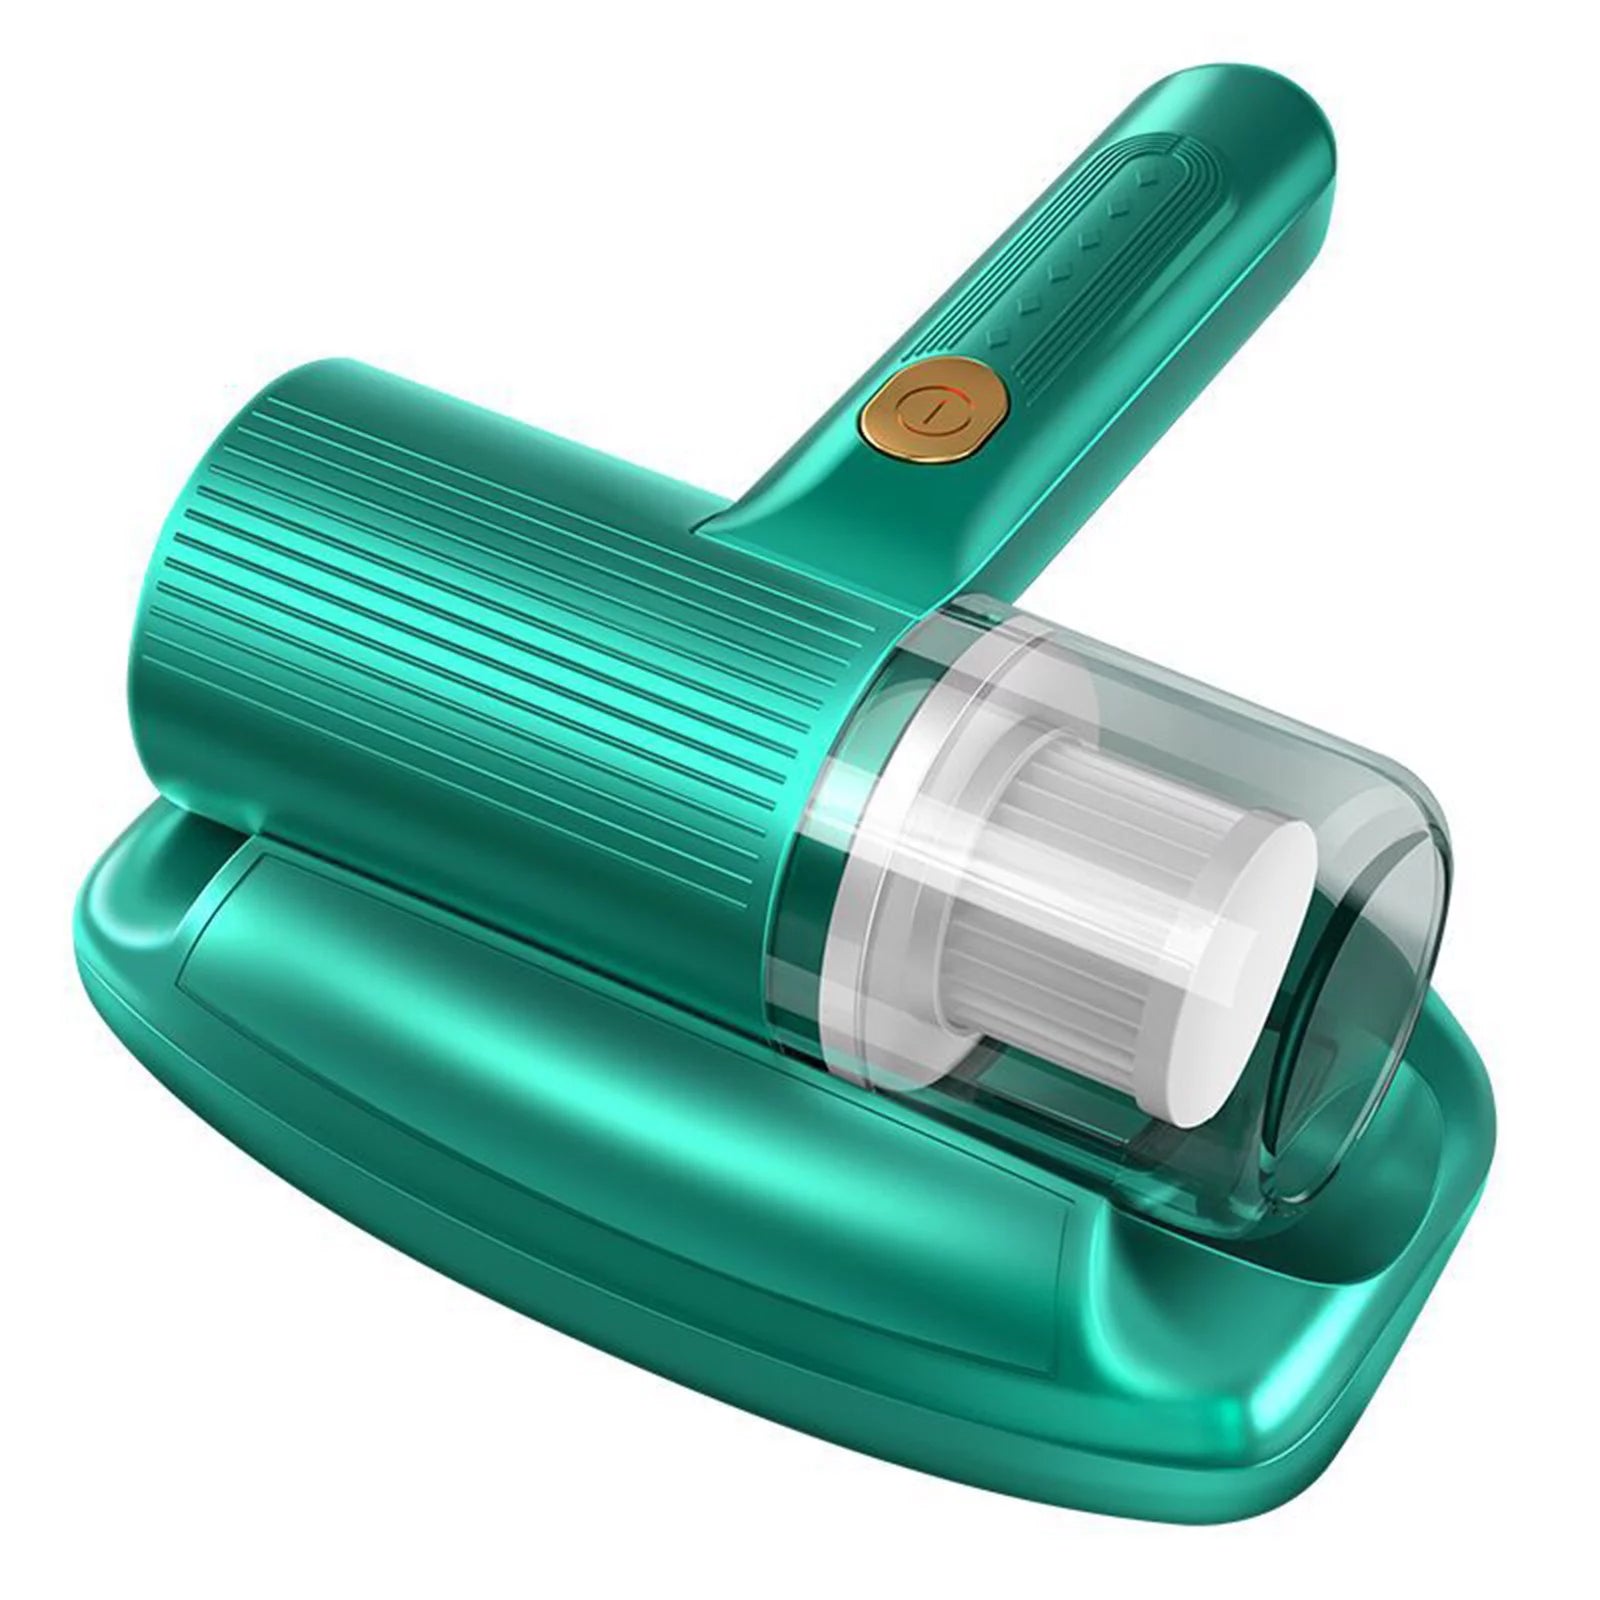 Mite Removal Wireless Portable Vacuum Cleaner